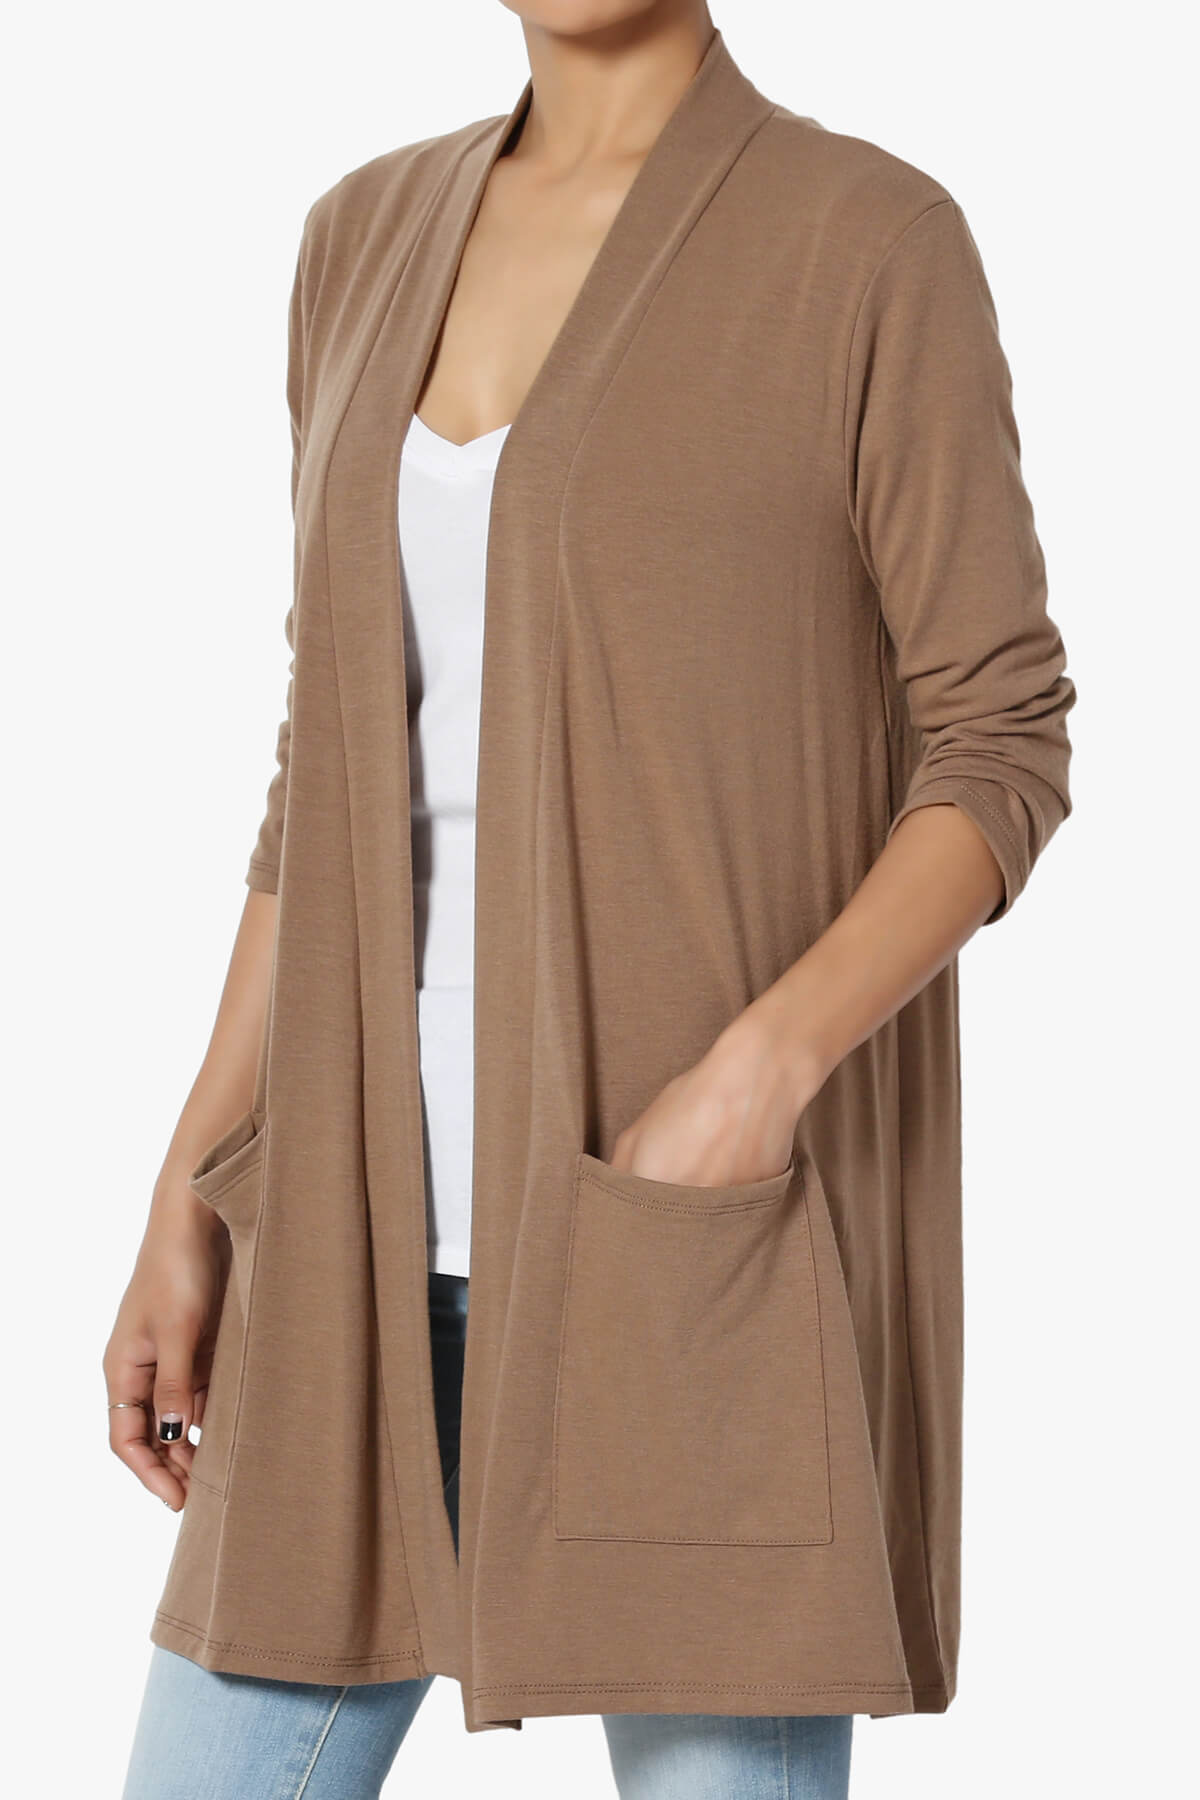 Load image into Gallery viewer, Daday Slouchy Pocket 3/4 Sleeve Cardigan COCOA_3
